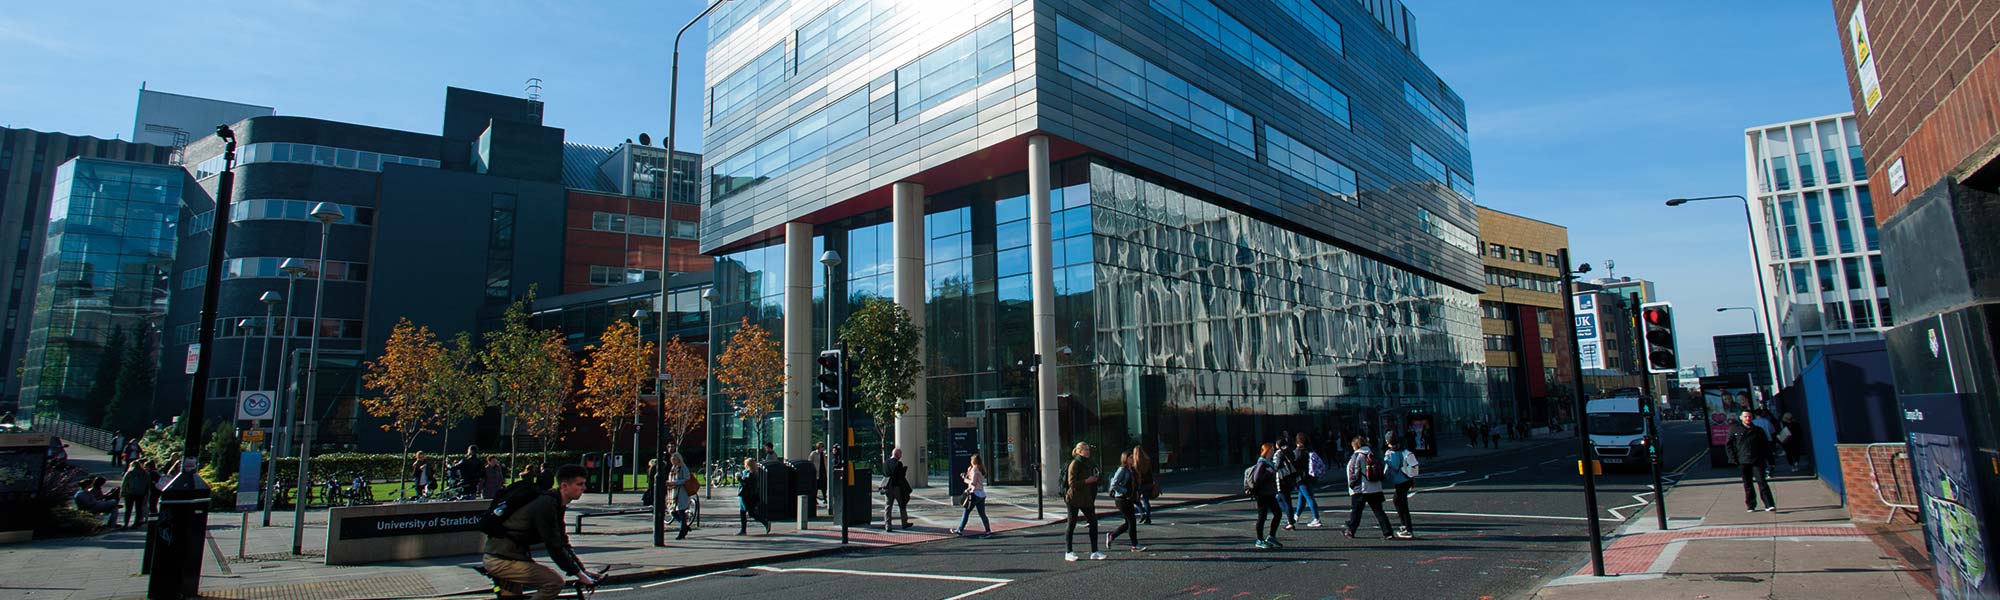 Exterior of Strathclyde Institute of Pharmacy & Biomedical Sciences.